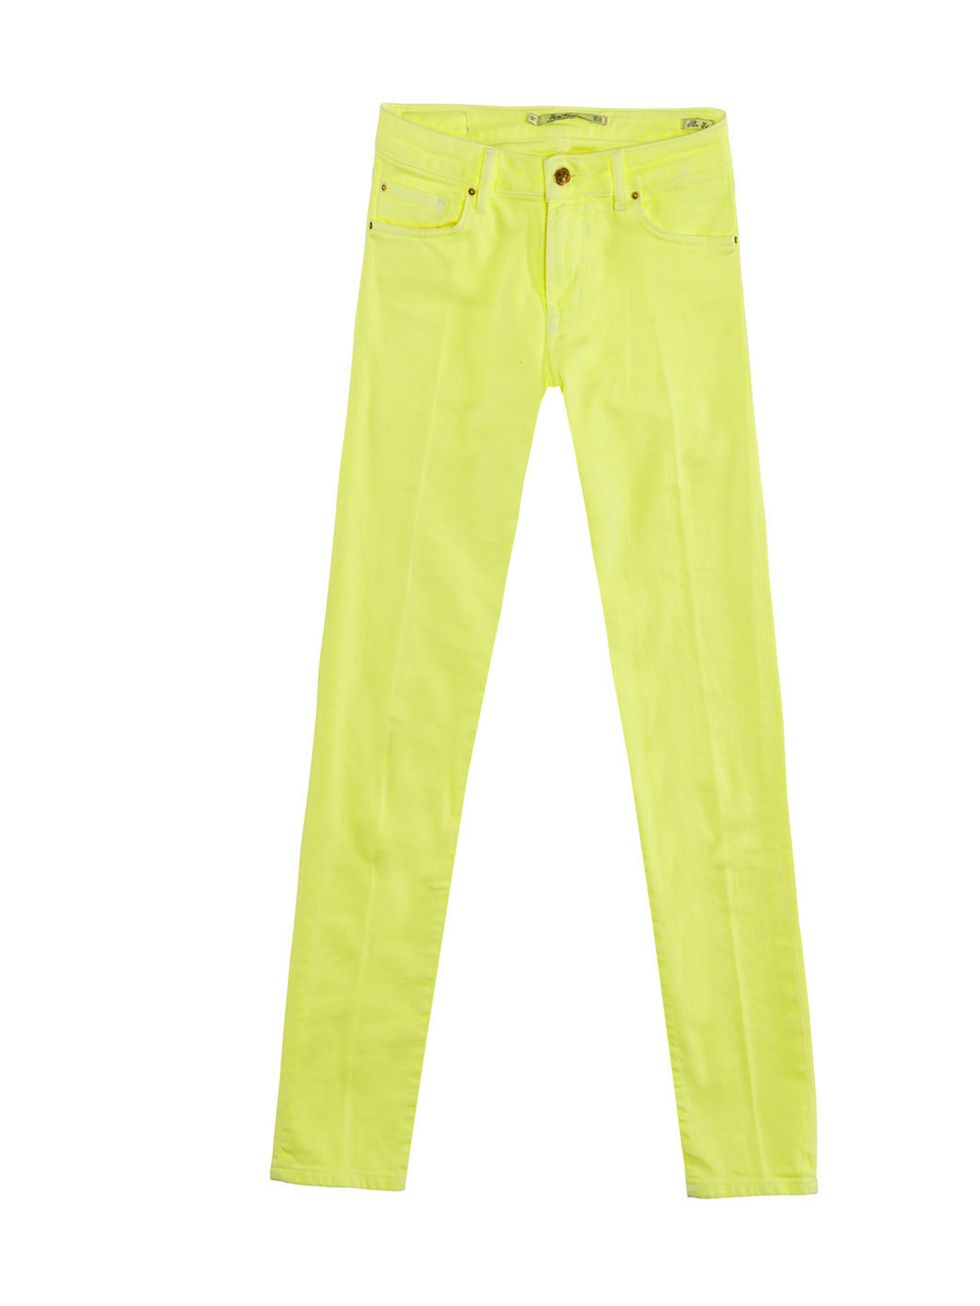 <p>For anyone wary of the neon trend , these affordable Zara jeans are the perfect way to test the water. Style with marl gray or white T-shirts... Zara neon yellow jeans, £35.99, for stockists call 0207 534 9500</p>